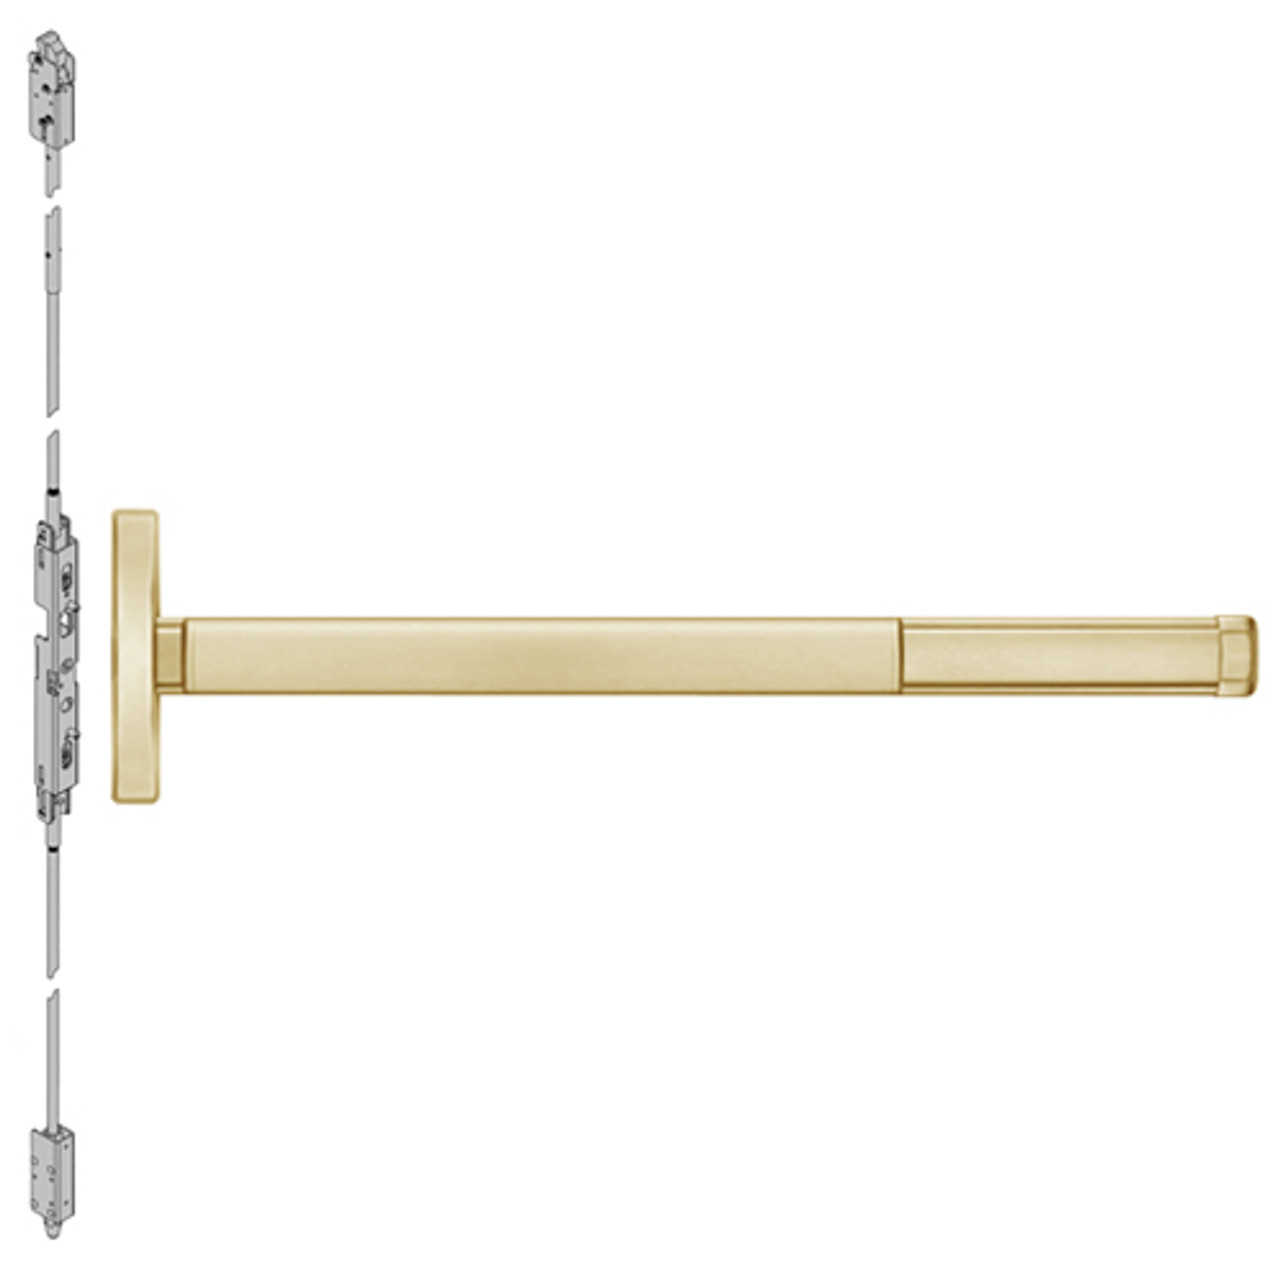 MLRFL2603-606-48 PHI 2600 Series Fire Rated Concealed Vertical Rod Exit Device with Motorized Latch Retraction Prepped for Key Retracts Latchbolt in Satin Brass Finish